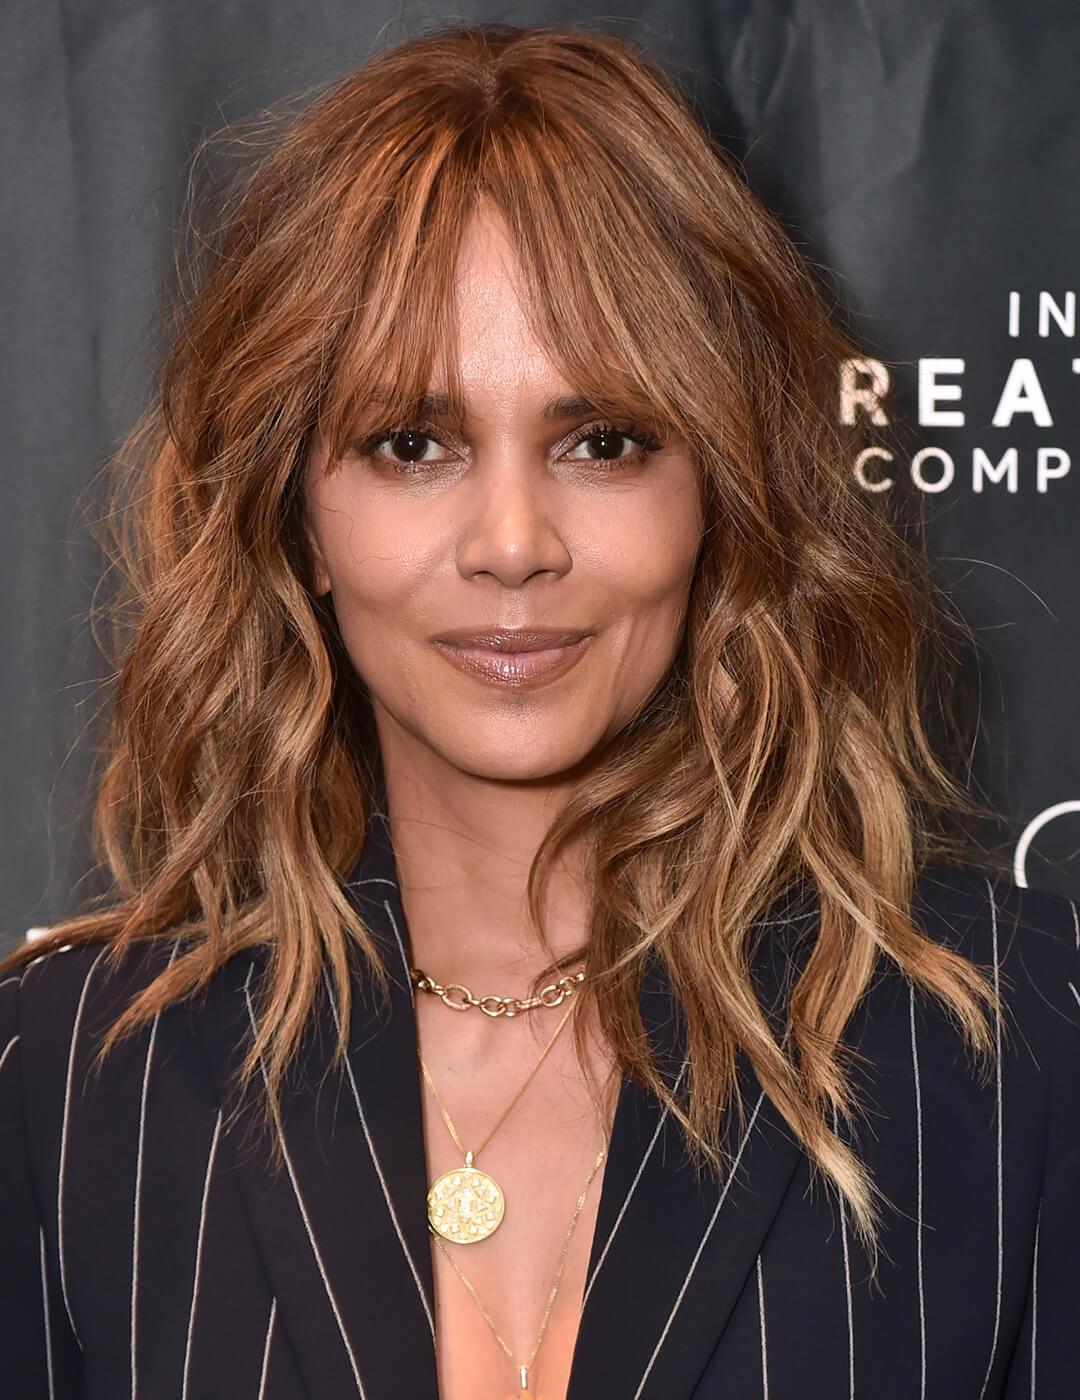 A photo of Halle Berry with a front feathering hairstyle with brown highlights wearing a black coat